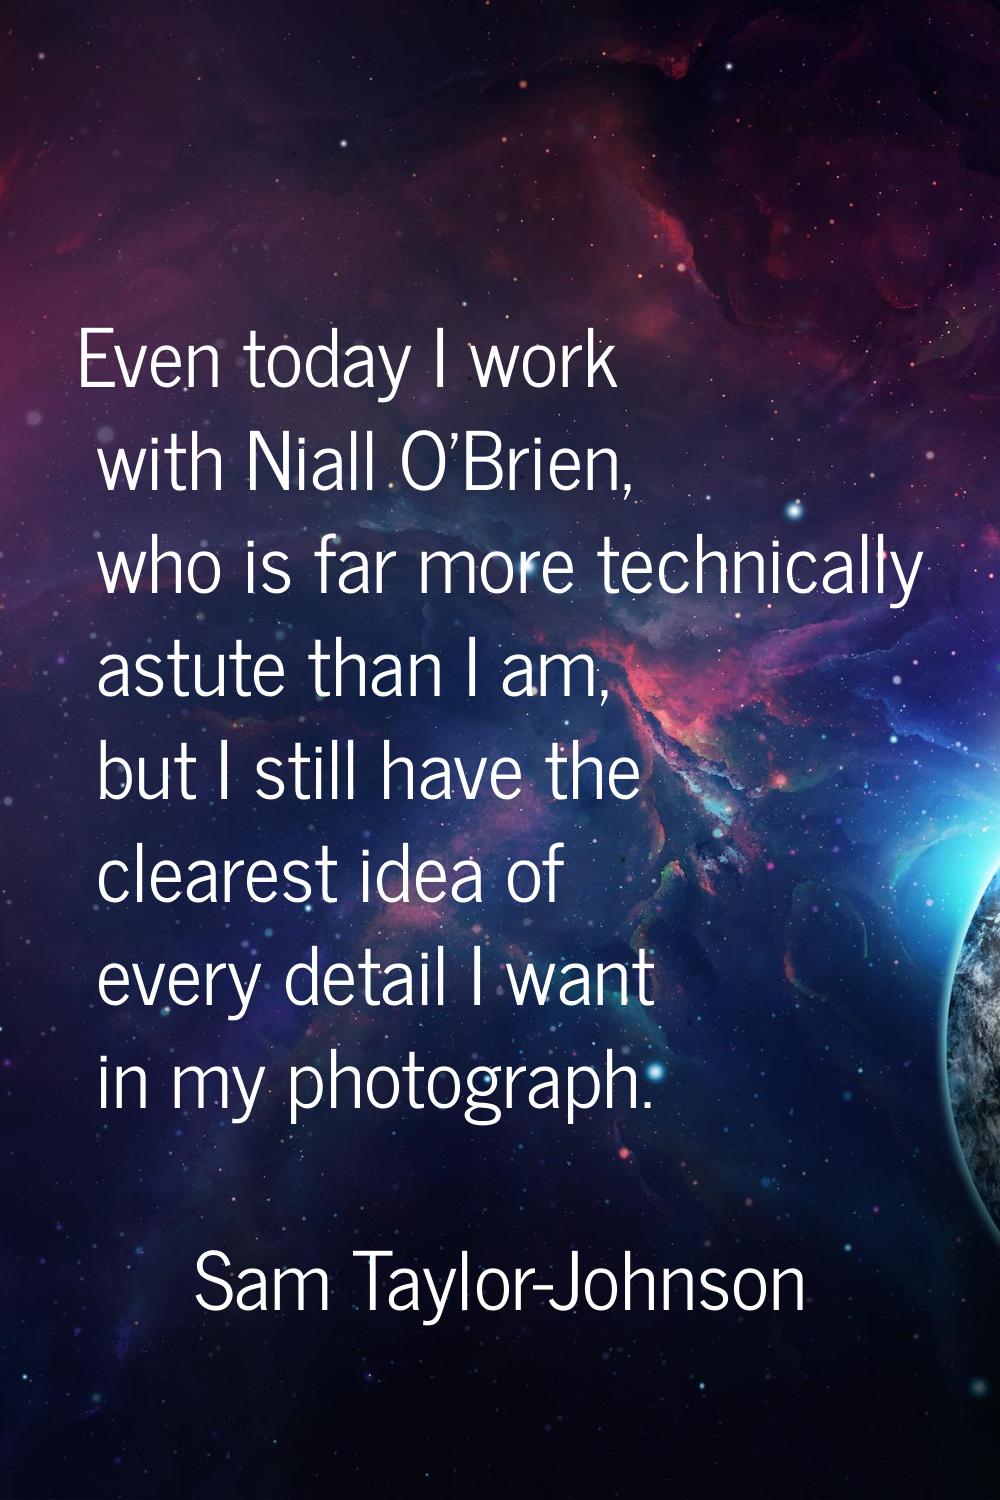 Even today I work with Niall O'Brien, who is far more technically astute than I am, but I still hav